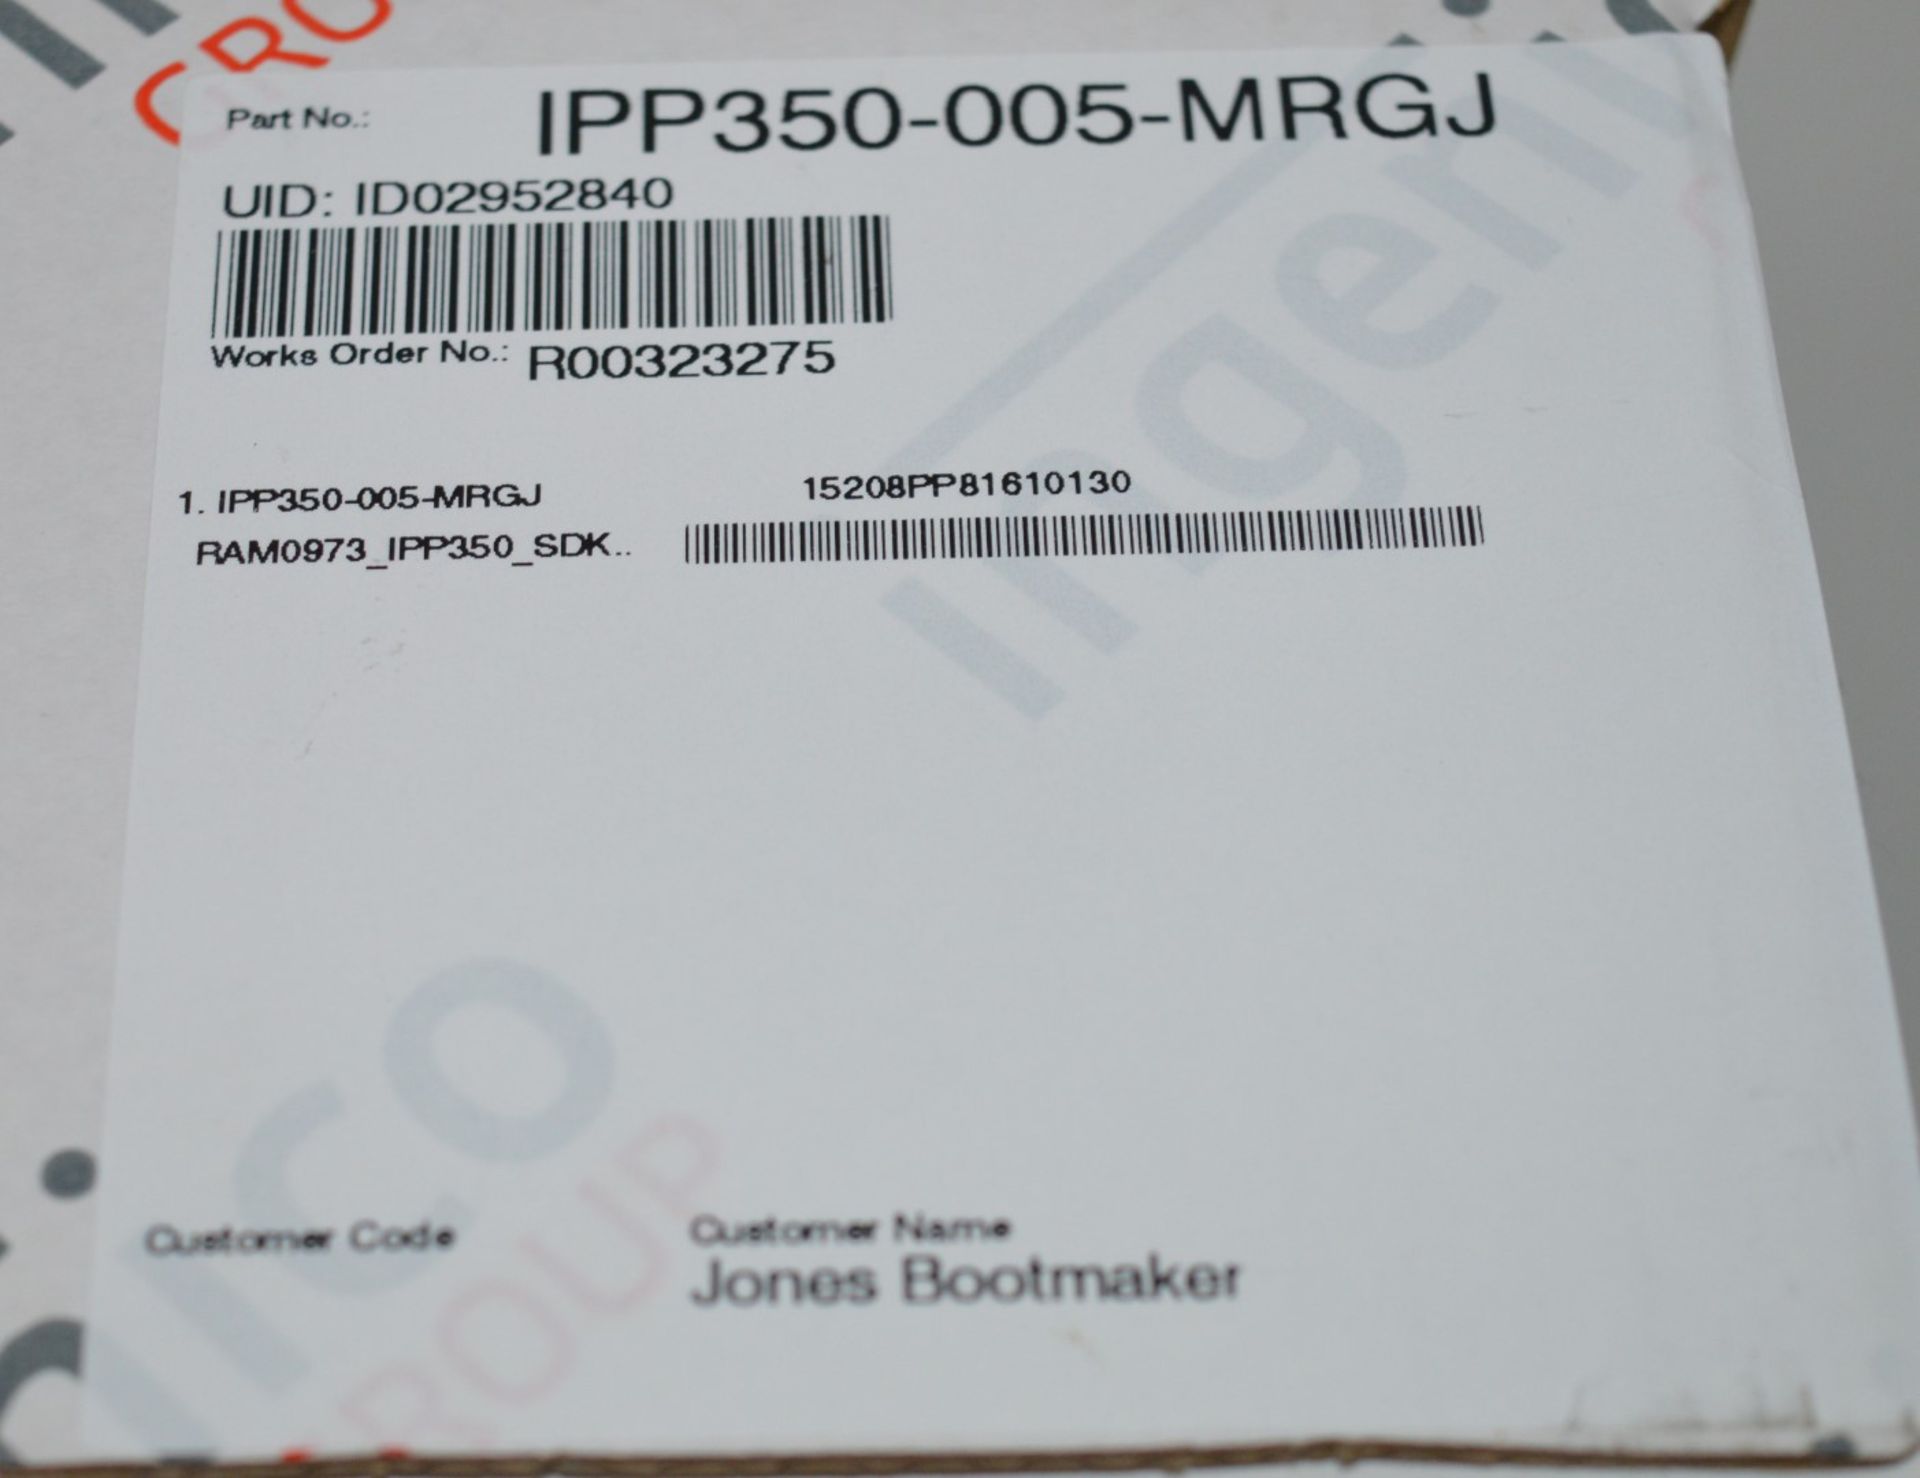 1 x Ingenico iPP350 Card Reader Chip and Pin Contactless Terminal With USB Cable - New Sealed - Image 3 of 3